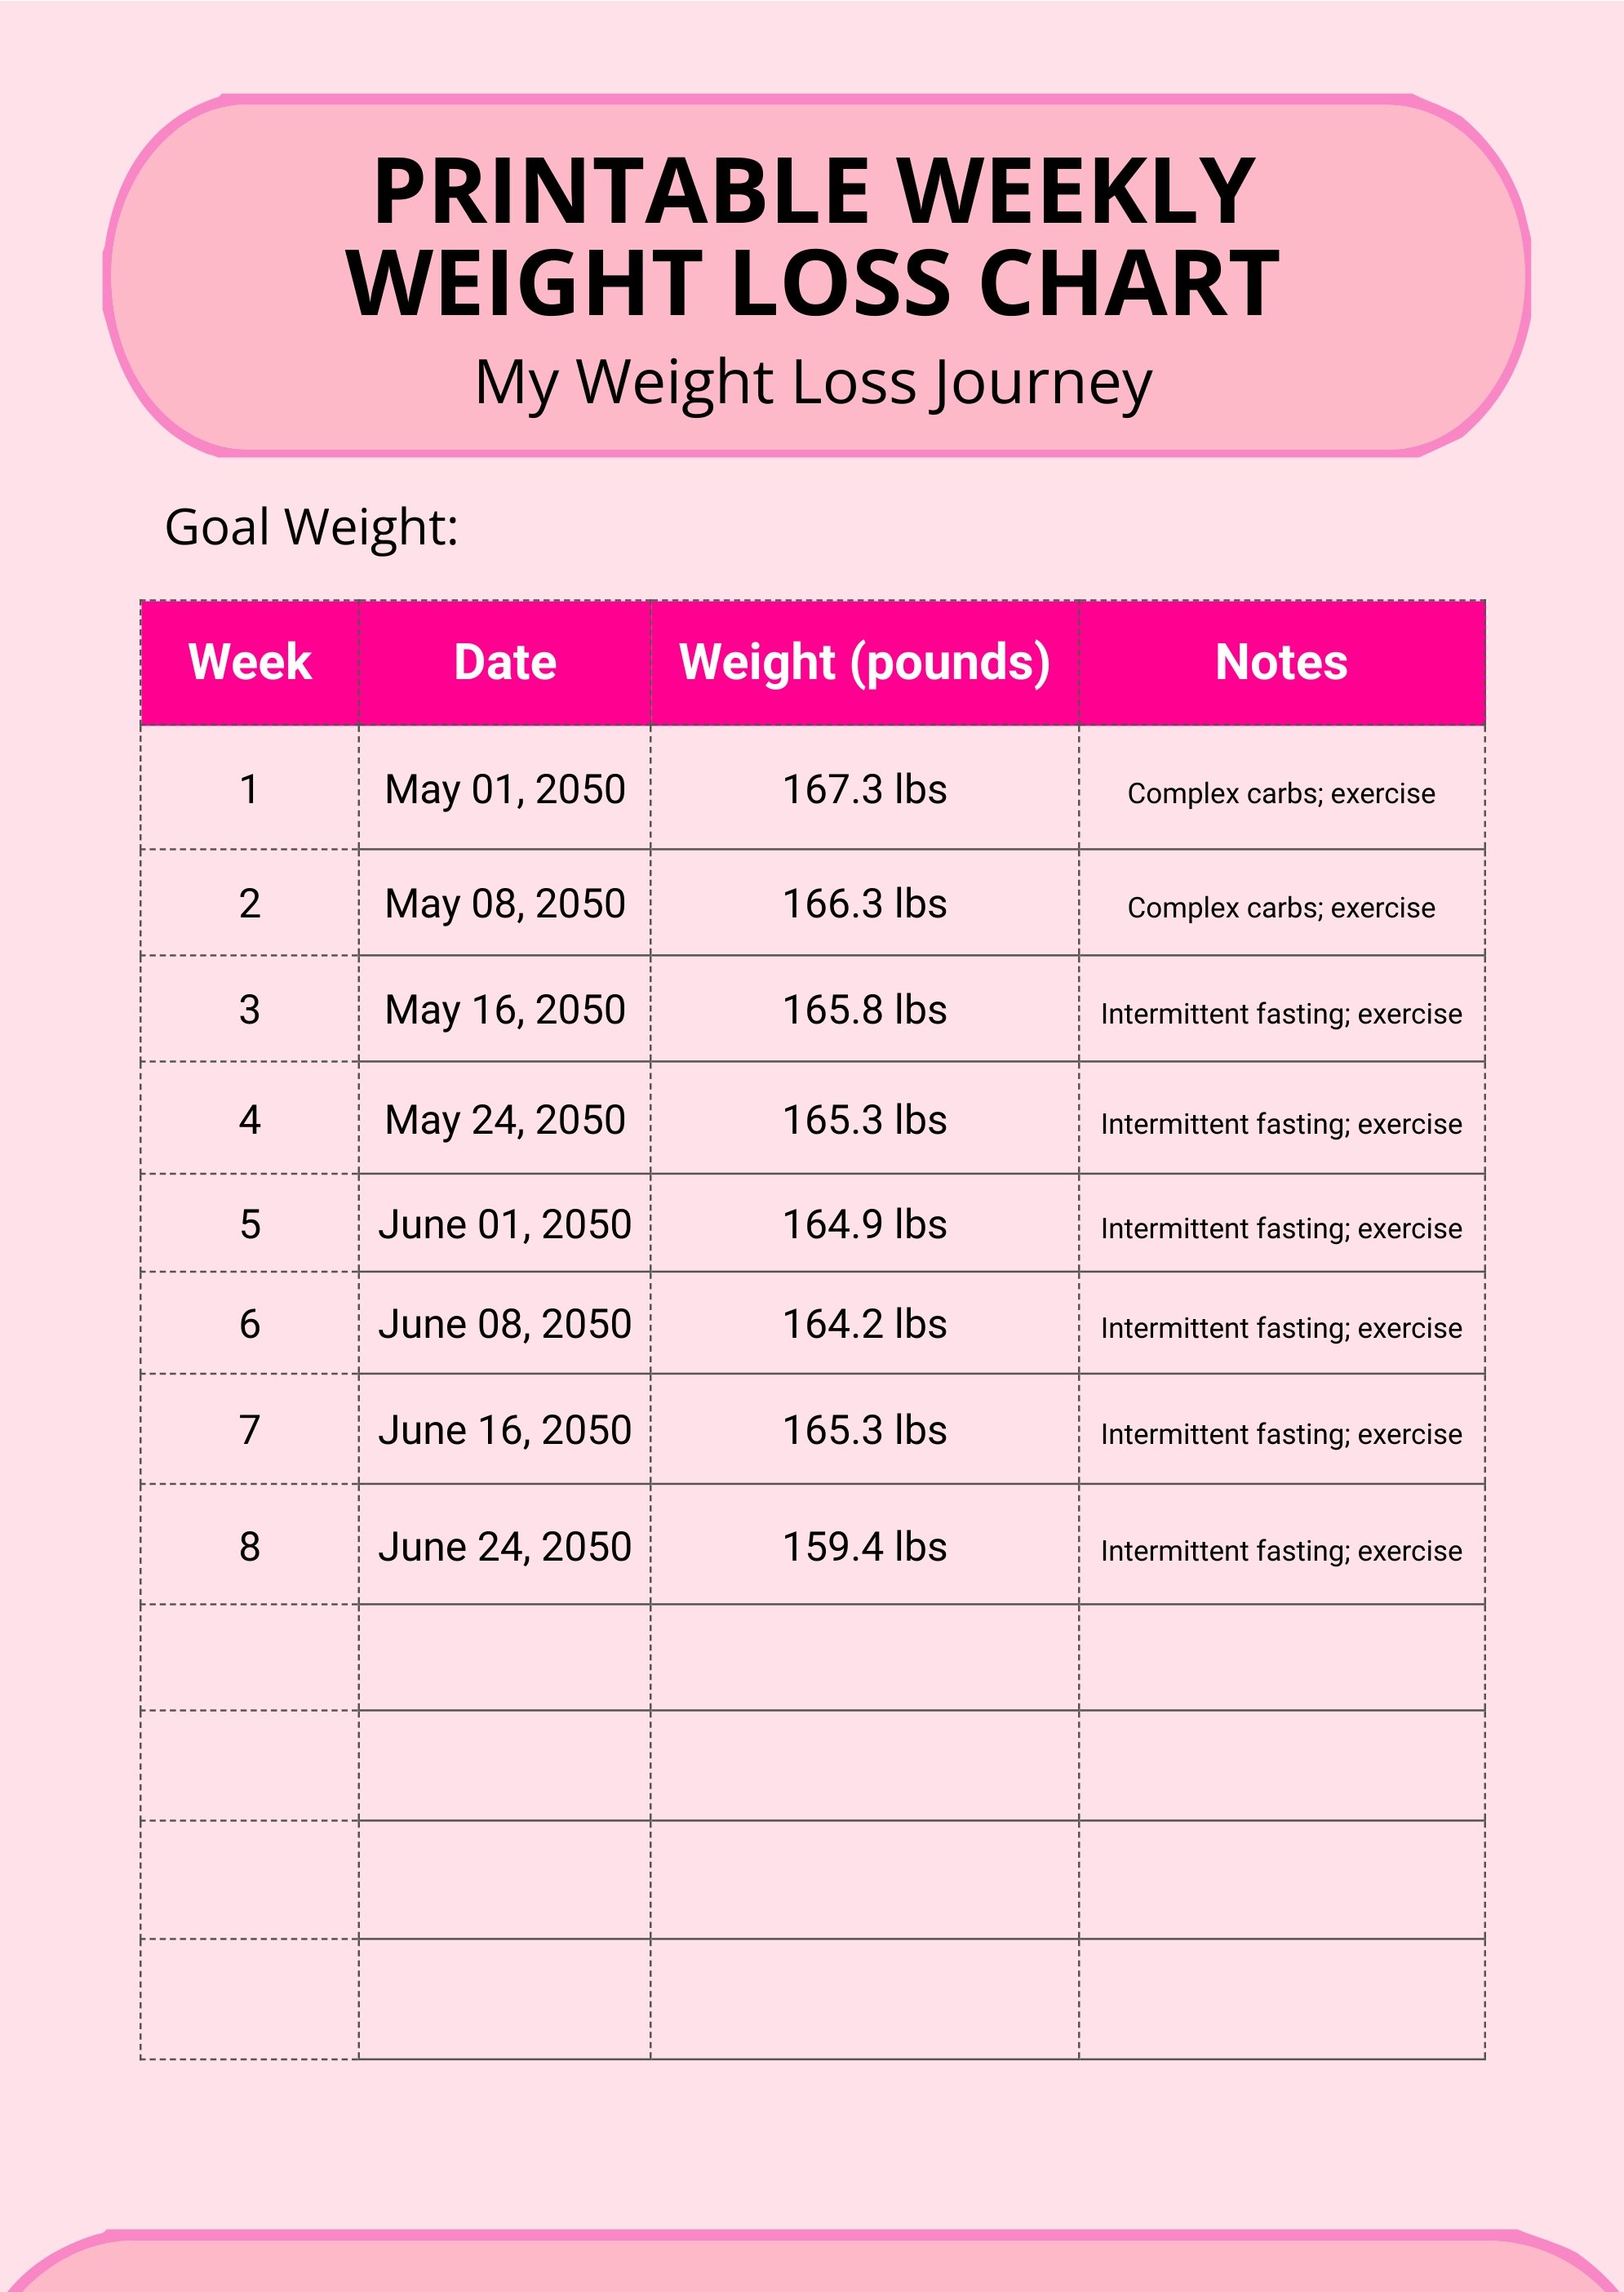 Printable Weekly Weight Loss Chart in PDF, Illustrator